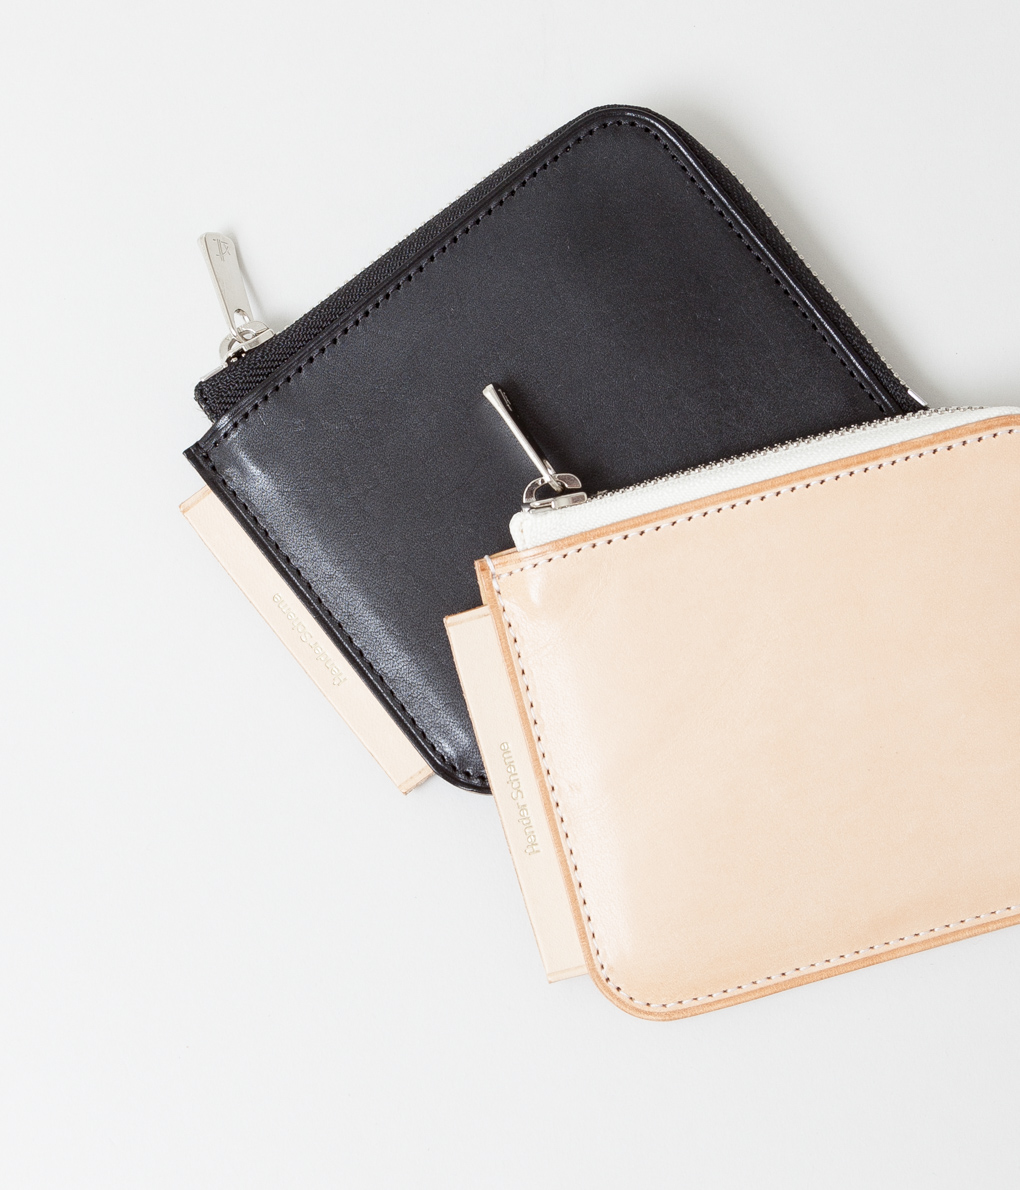 New Arrival “Hender Scheme L purse” | well-made by MAIDENS SHOP